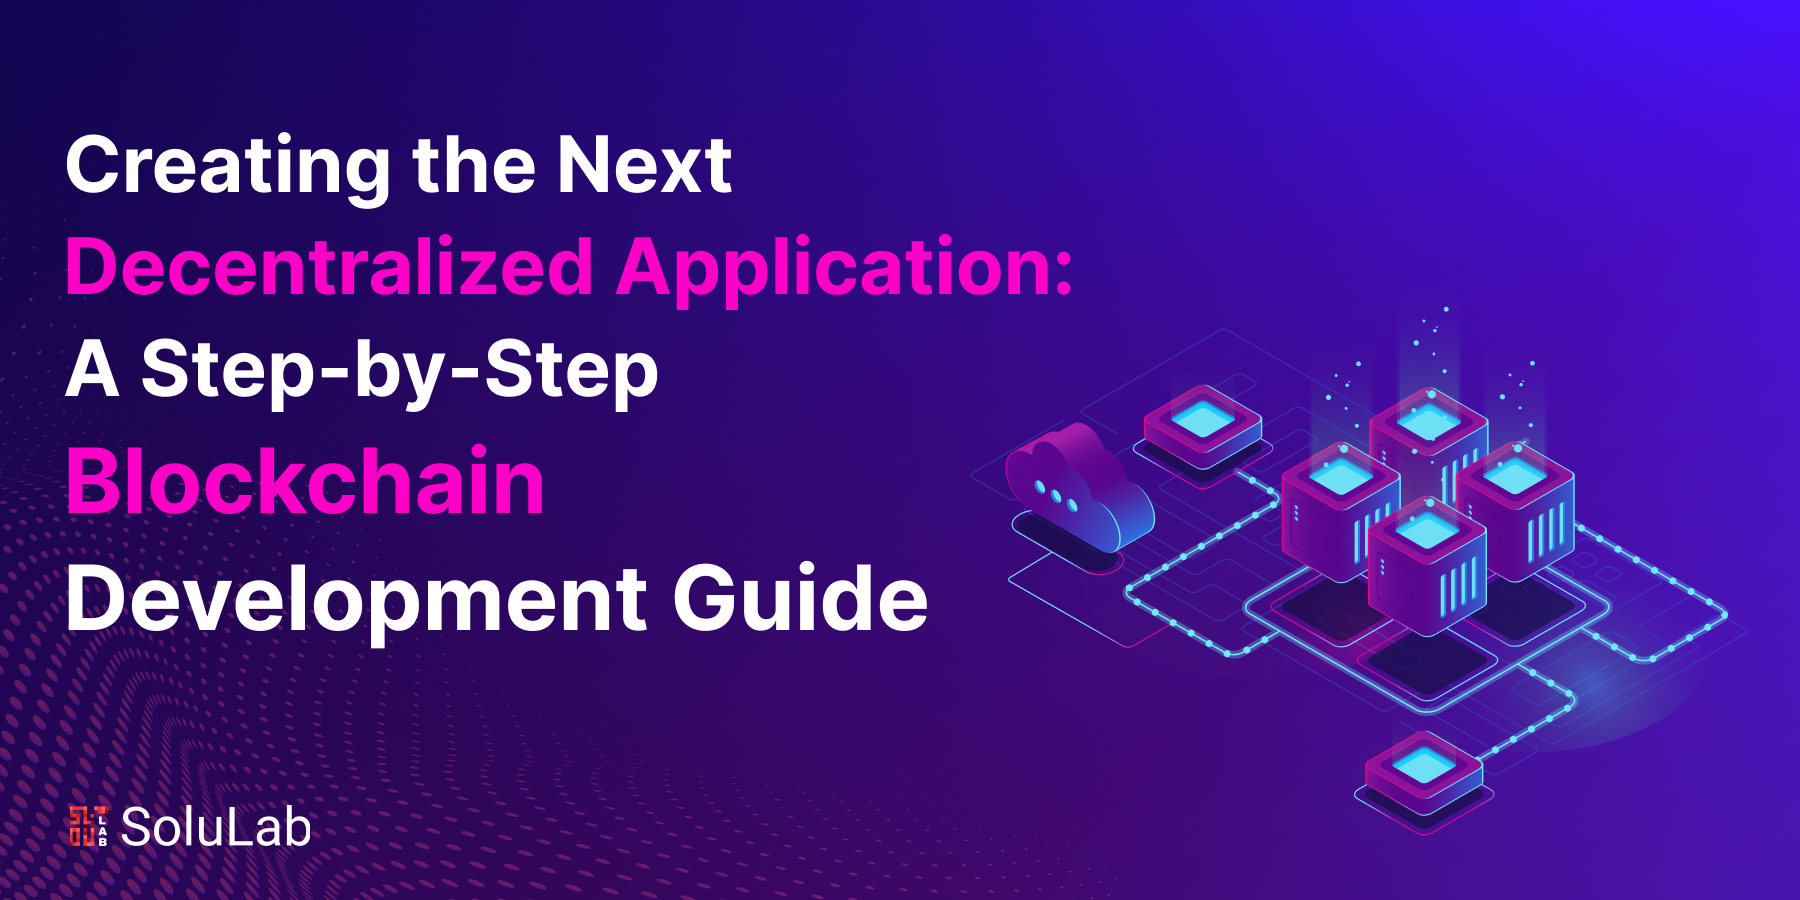 A Step-by-Step Blockchain Development Guide